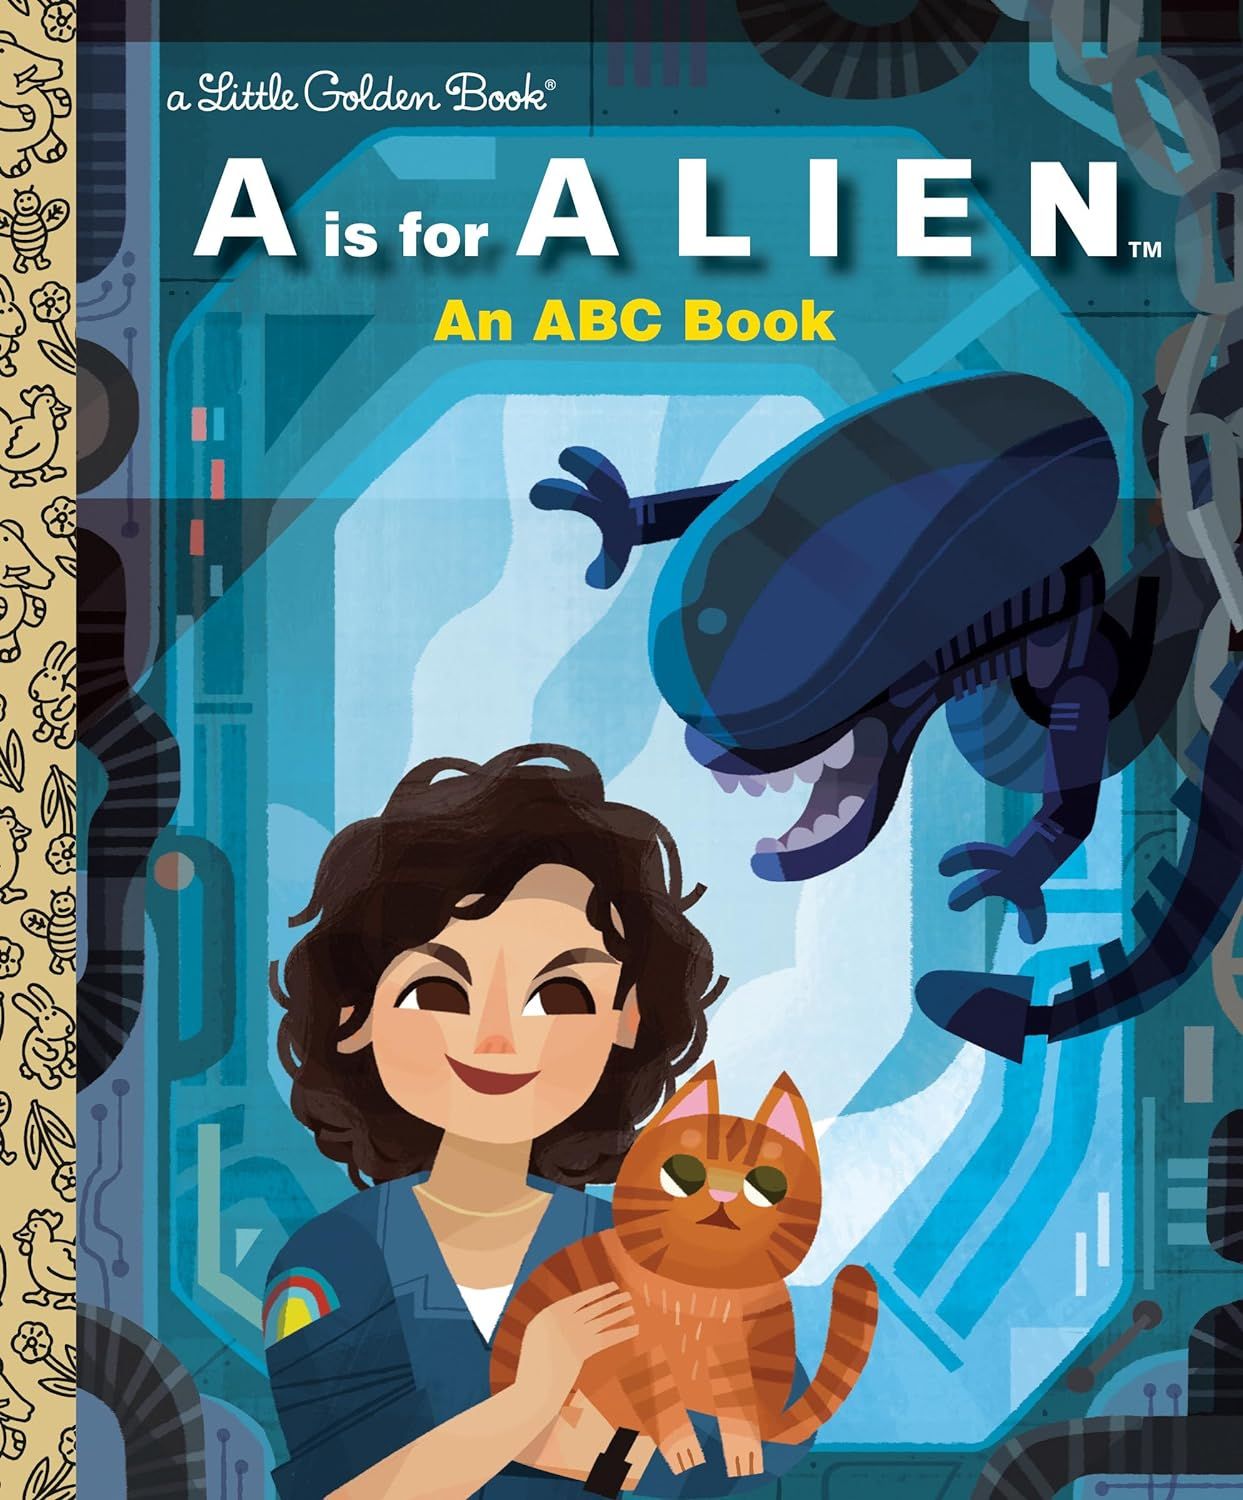 A is for ALIEN book cover featuring Ellen Ripley, a cat and the alien.